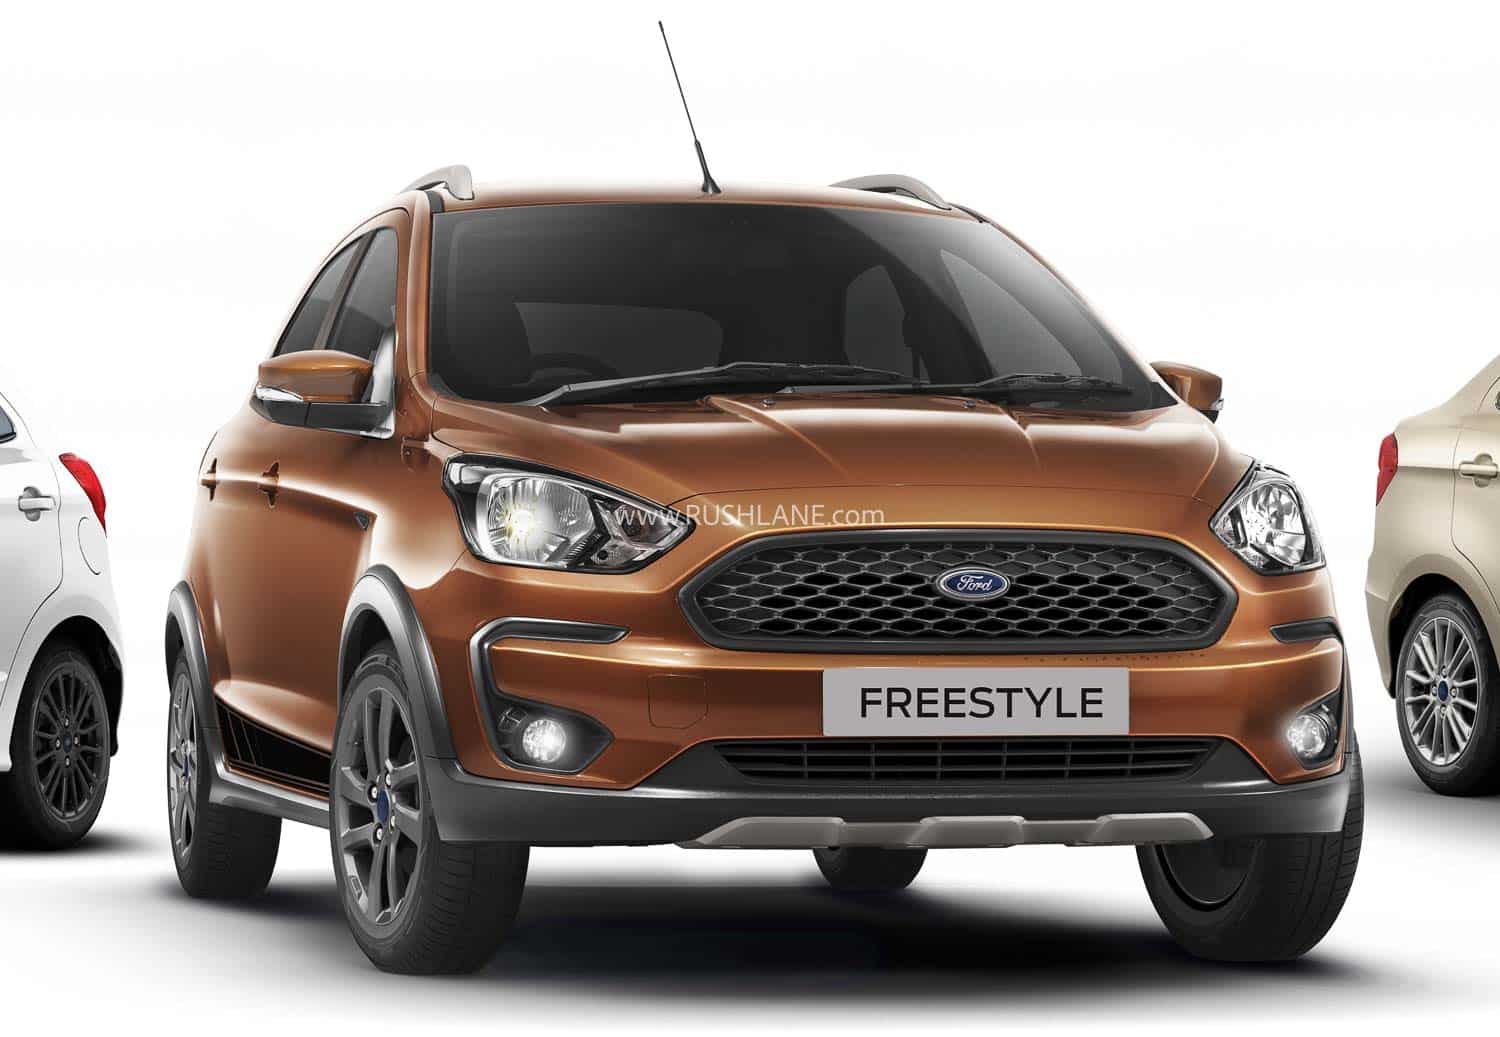 Ford Freestyle BS6